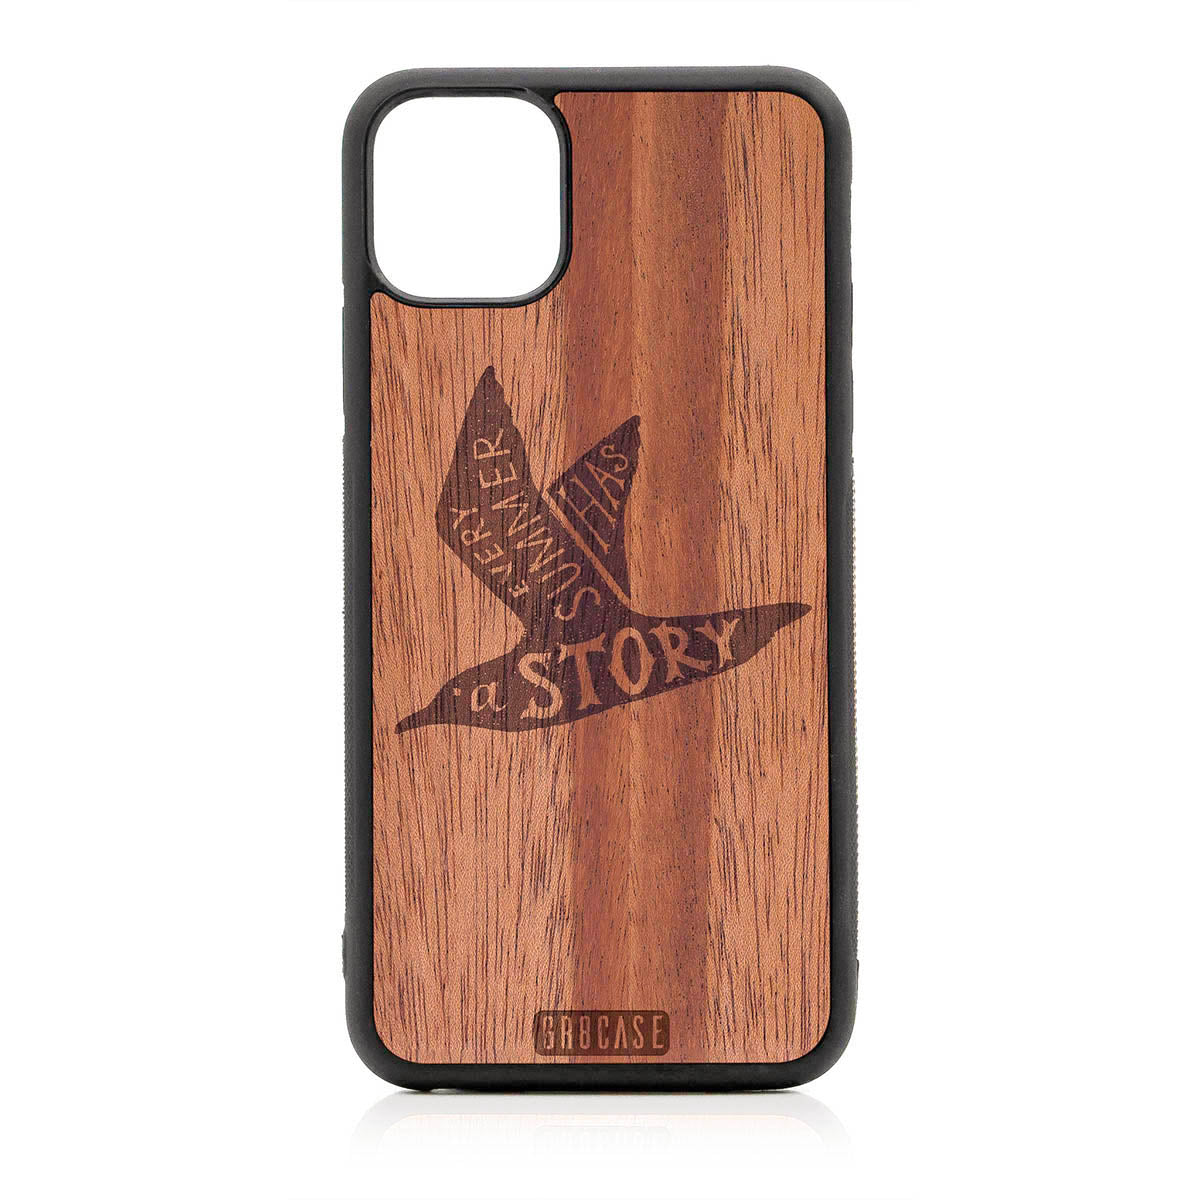 Every Summer Has A Story (Seagull) Design Wood Case For iPhone 11 Pro Max